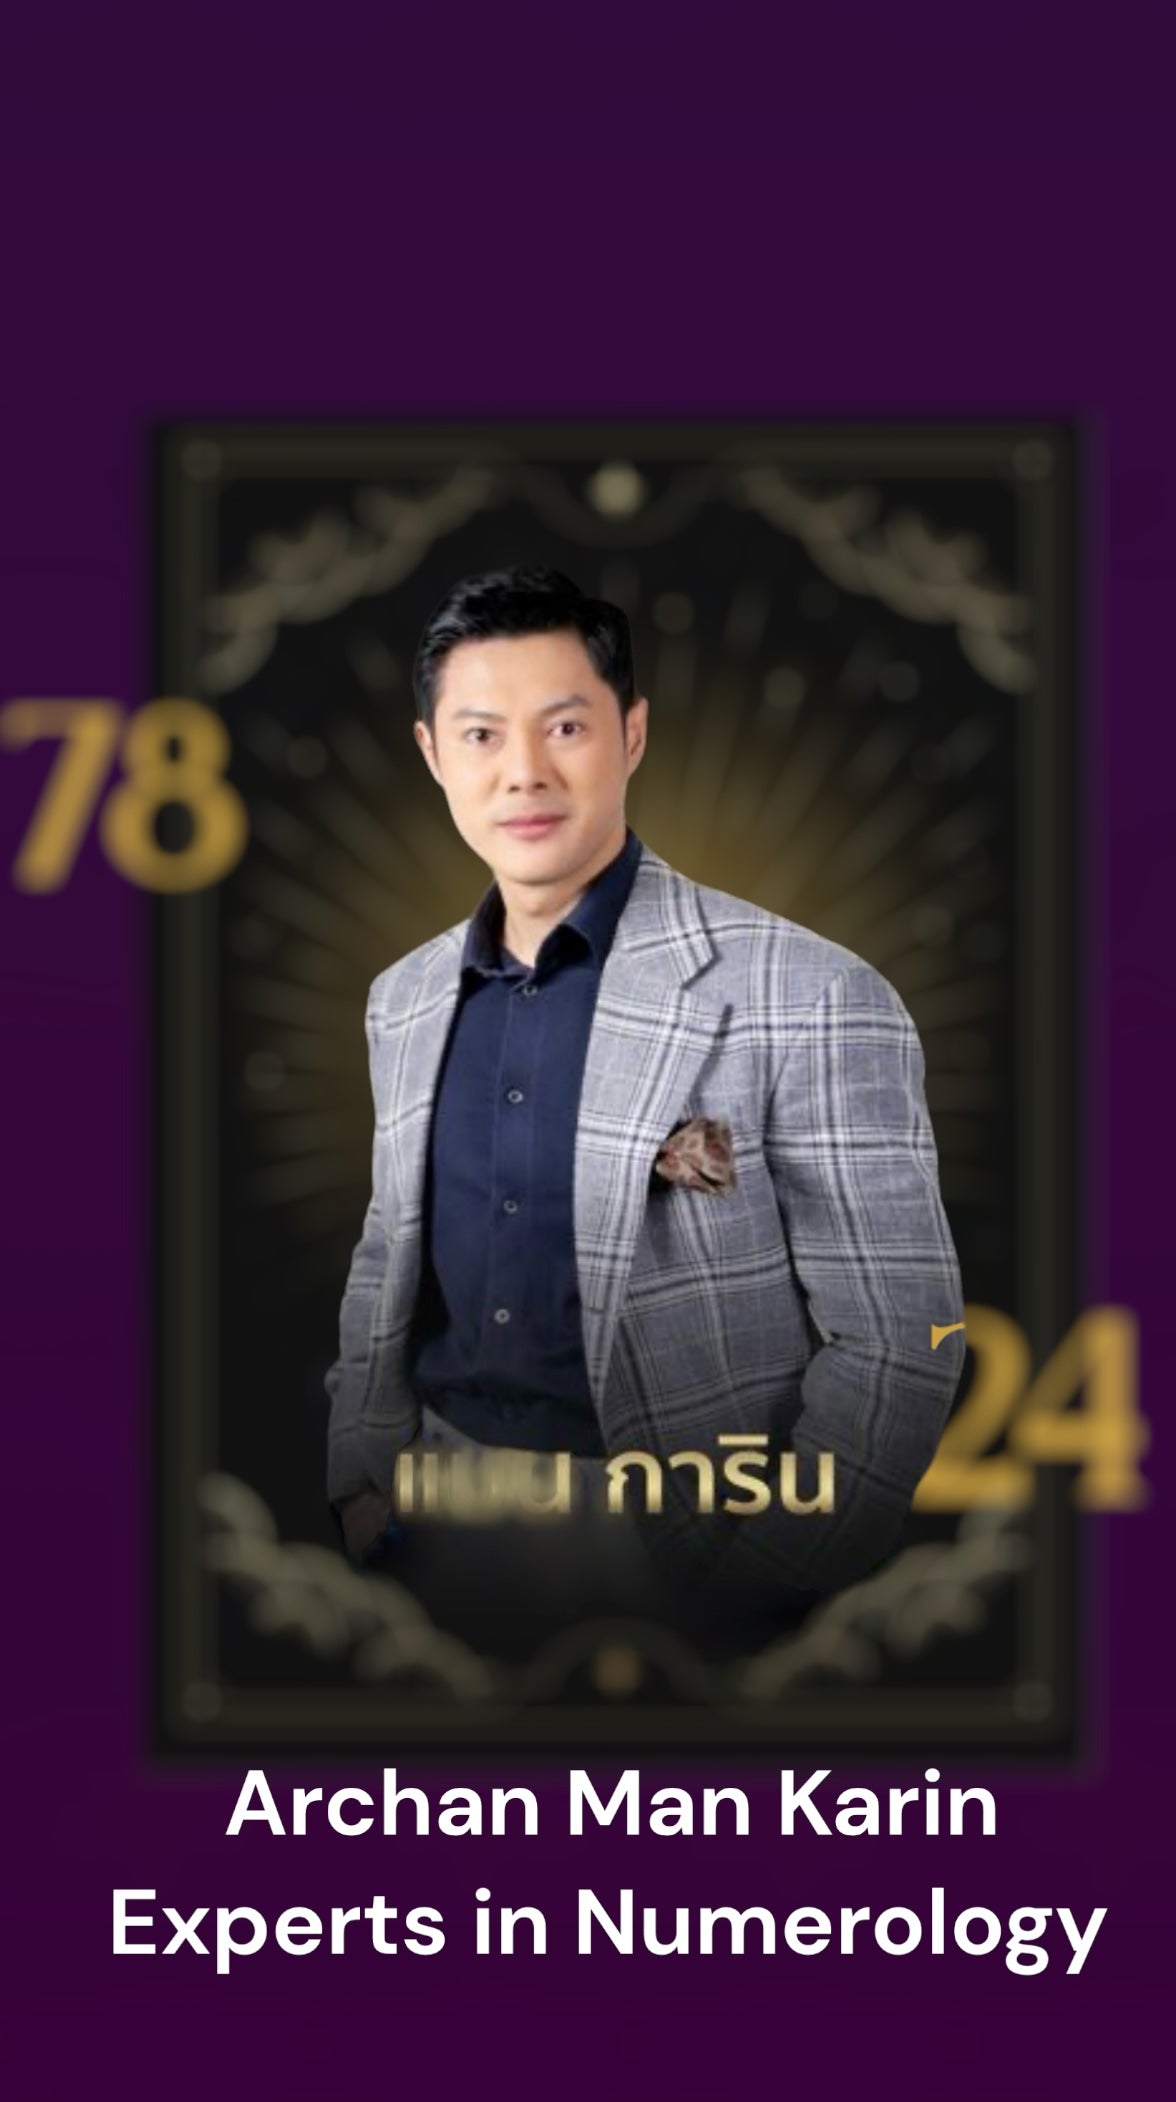 🧞‍♂️WISH GRANTING 🧞‍♂️EXPERT astrologists in Thailand have collaborated to create a special digital wallpaper for all phone models, featuring a customized image of PAYANAK.